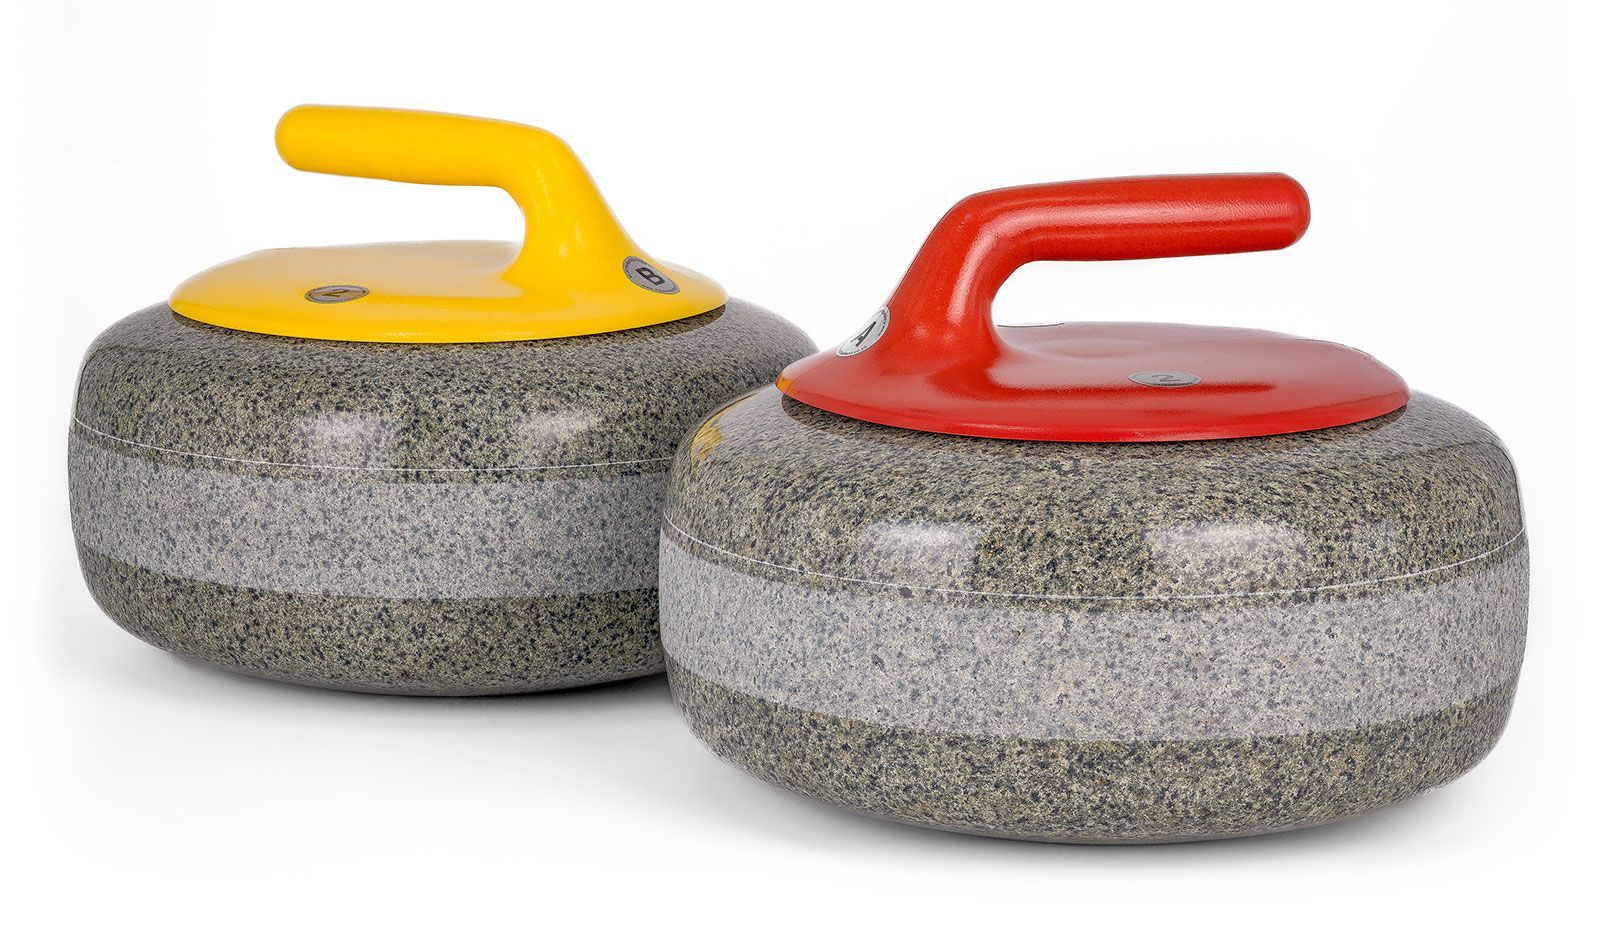 2 curling stones. One with a yellow handle and one with red handle